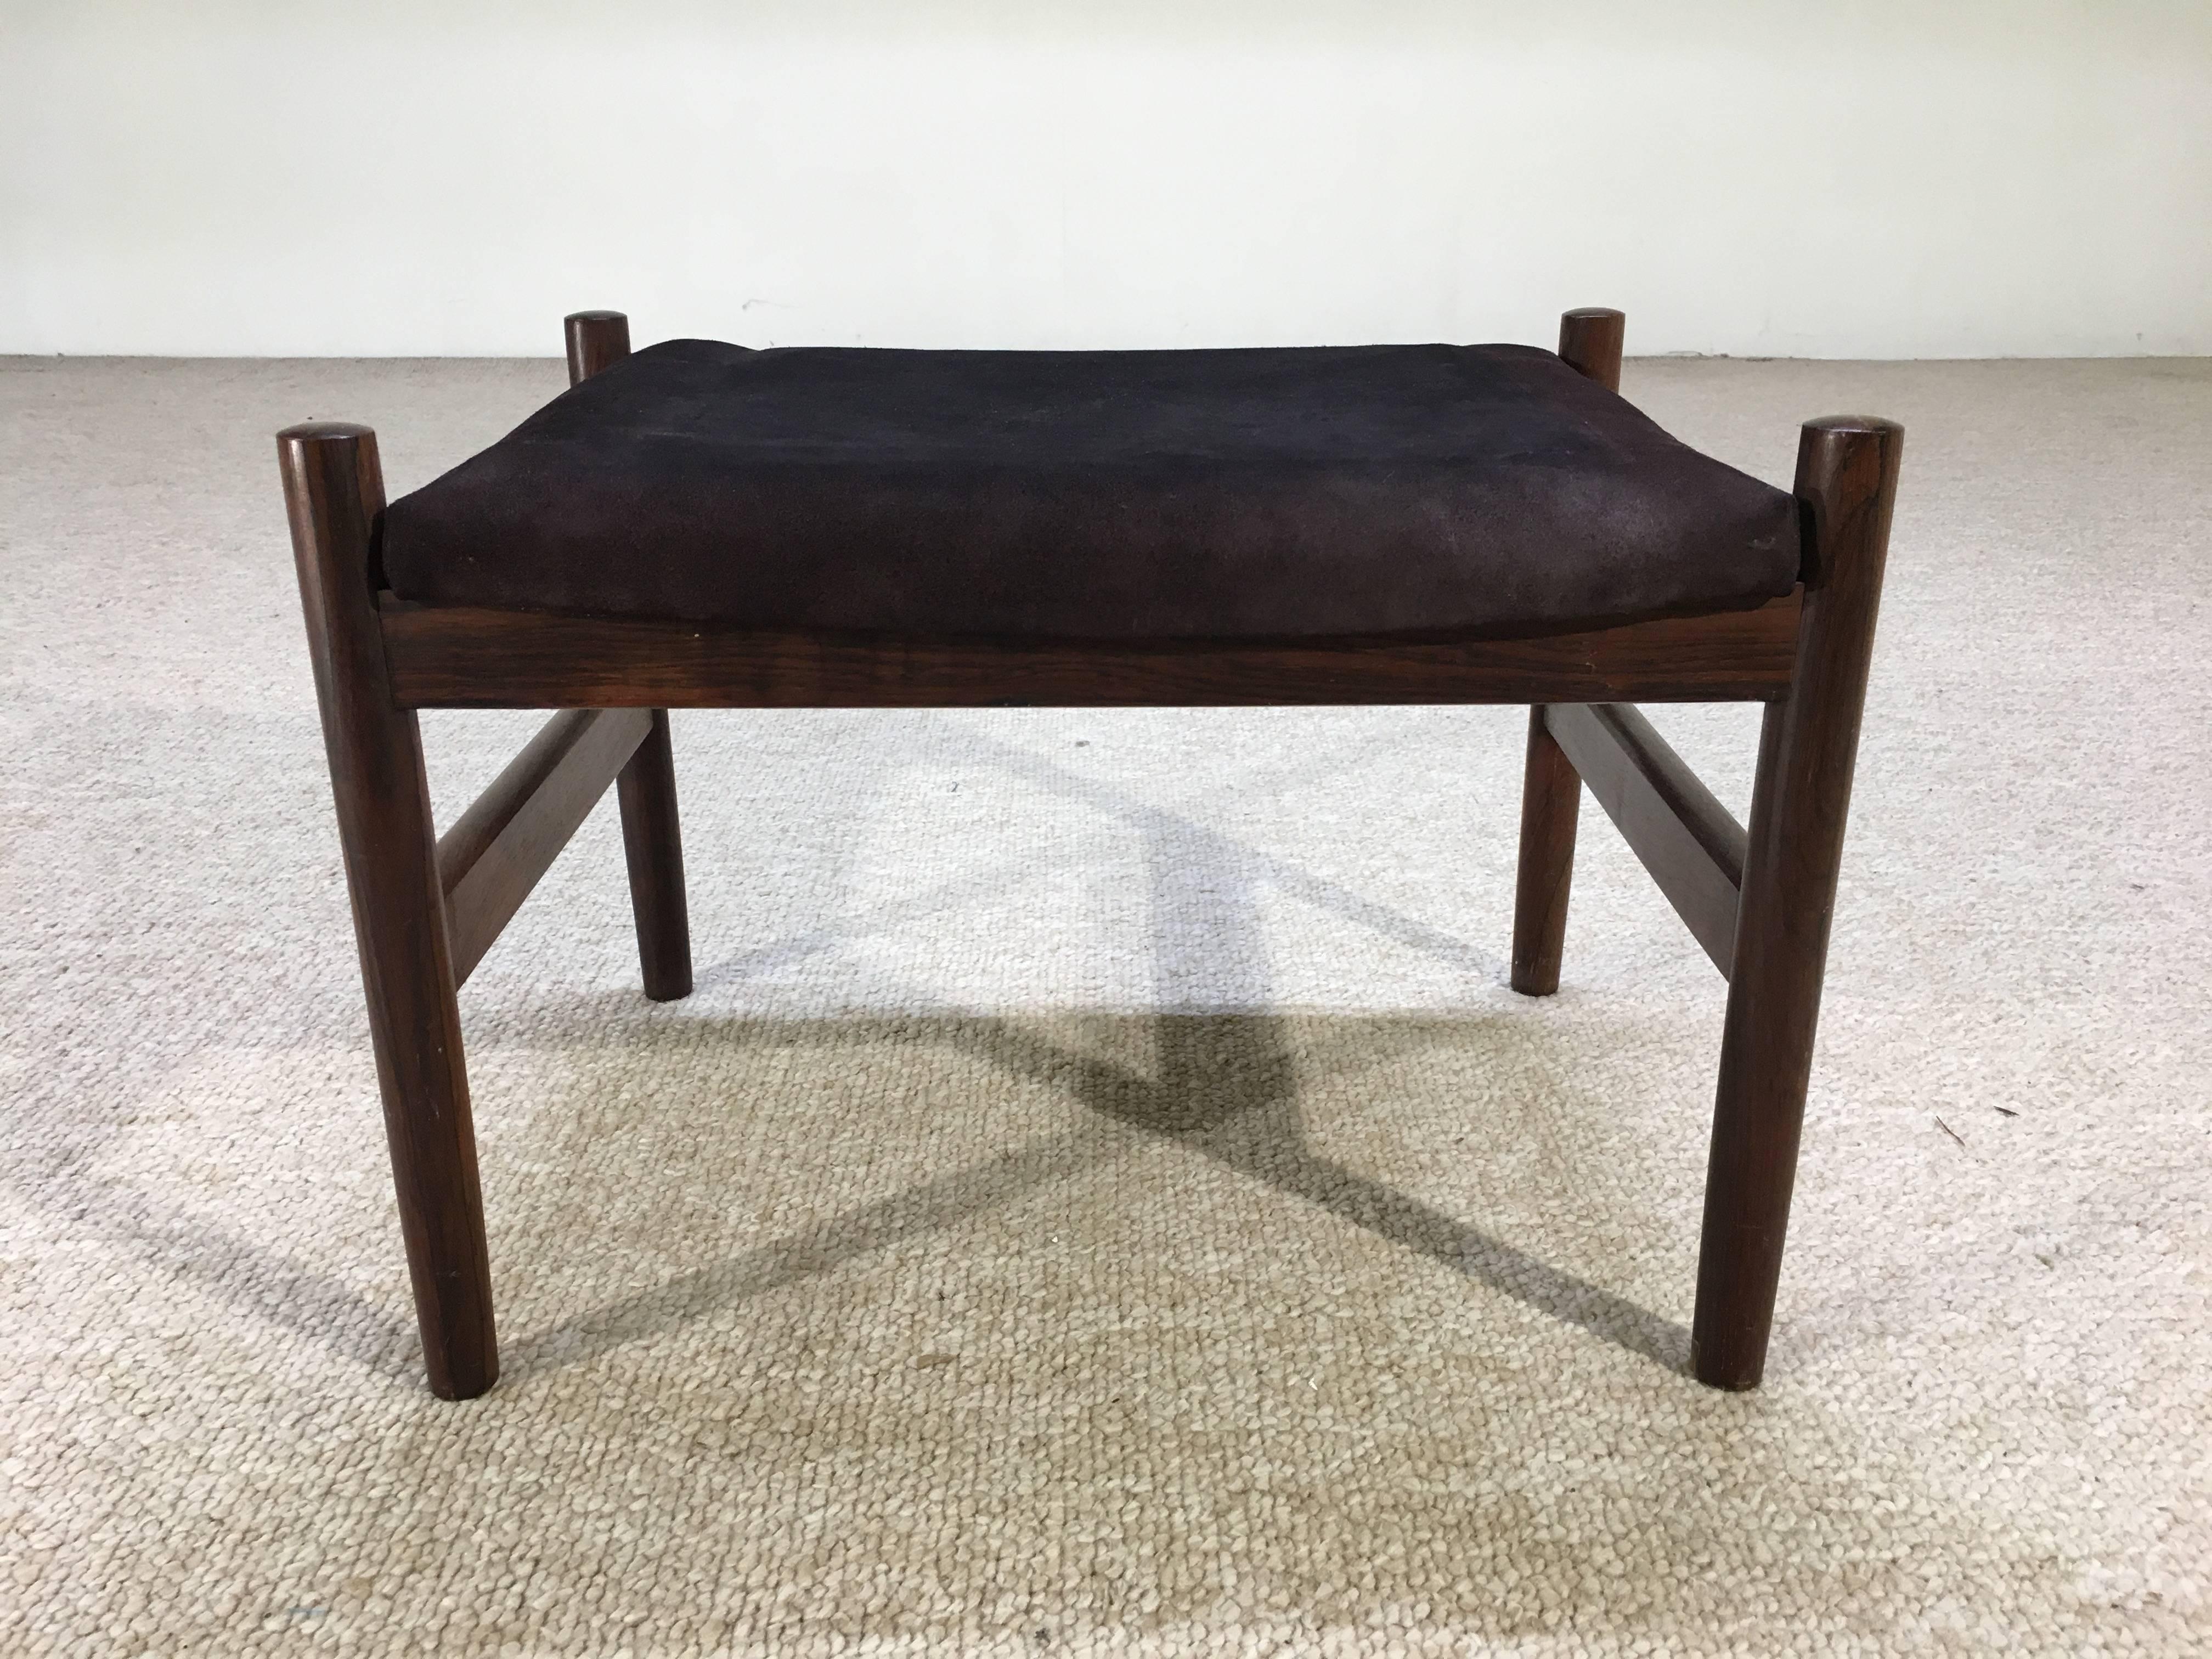 A beautiful design framed in rosewood with suede upholstery.
We have a matching rosewood Spottrup ottoman listed as well in red suede if you need a pair.